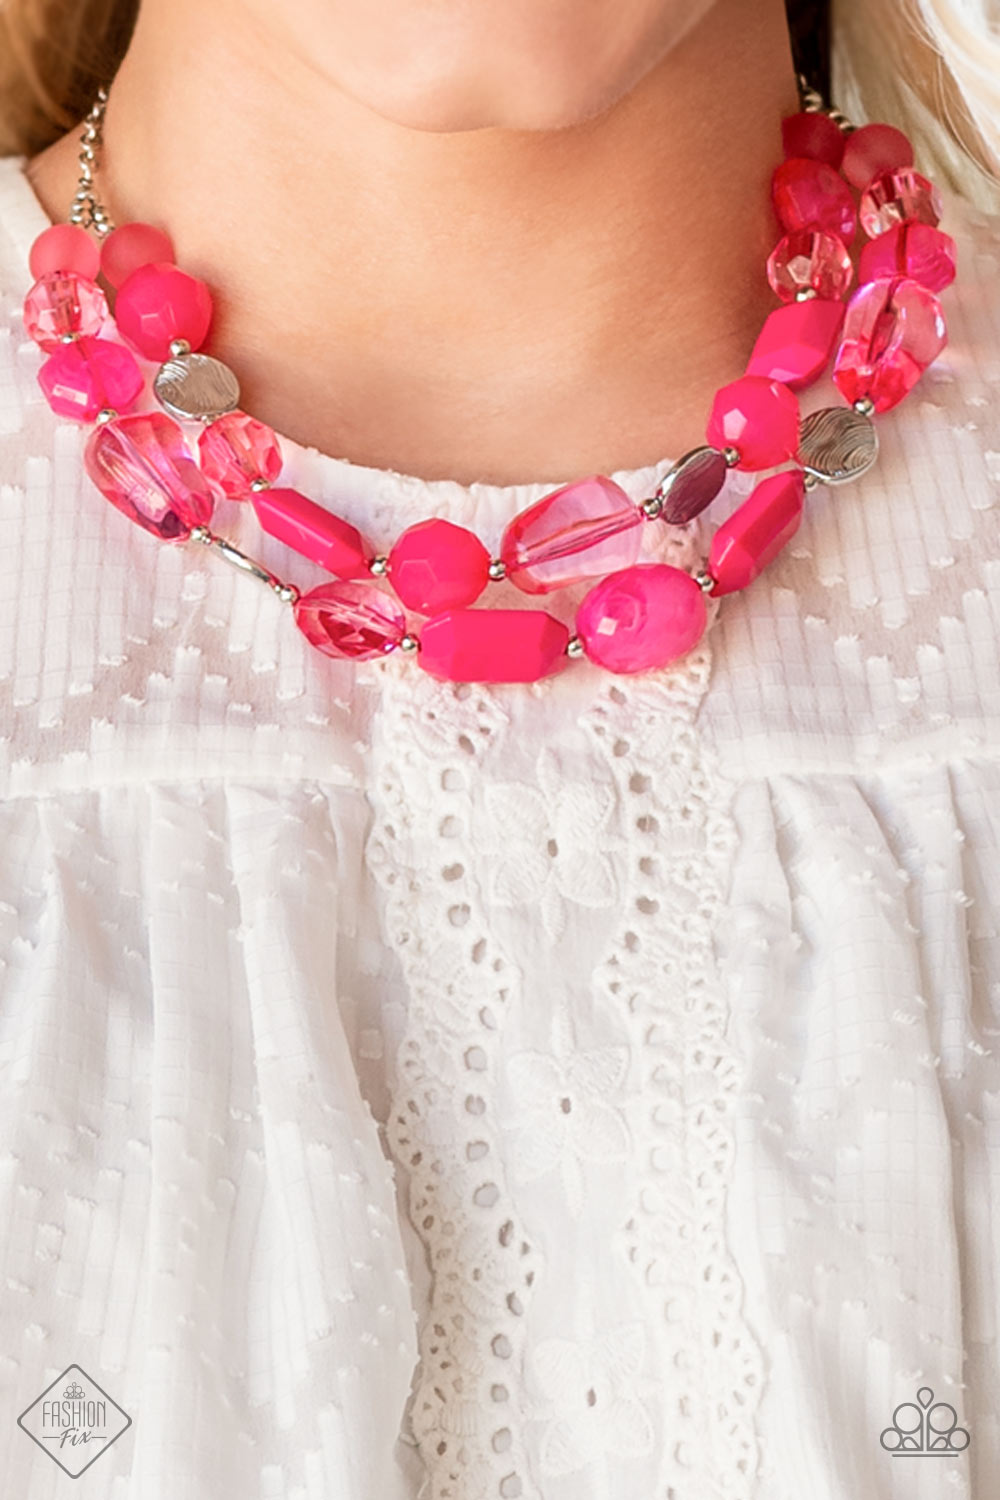 Oceanic Opulence - Pink Necklace varying in shape and opacity, a vibrant collection of faceted and smooth Raspberry Sorbet beads join textured silver discs and dainty silver beads along two thin wires, layering into a flamboyant pop of color below the collar. Features an adjustable clasp closure.  Sold as one individual necklace. Includes one pair of matching earrings.